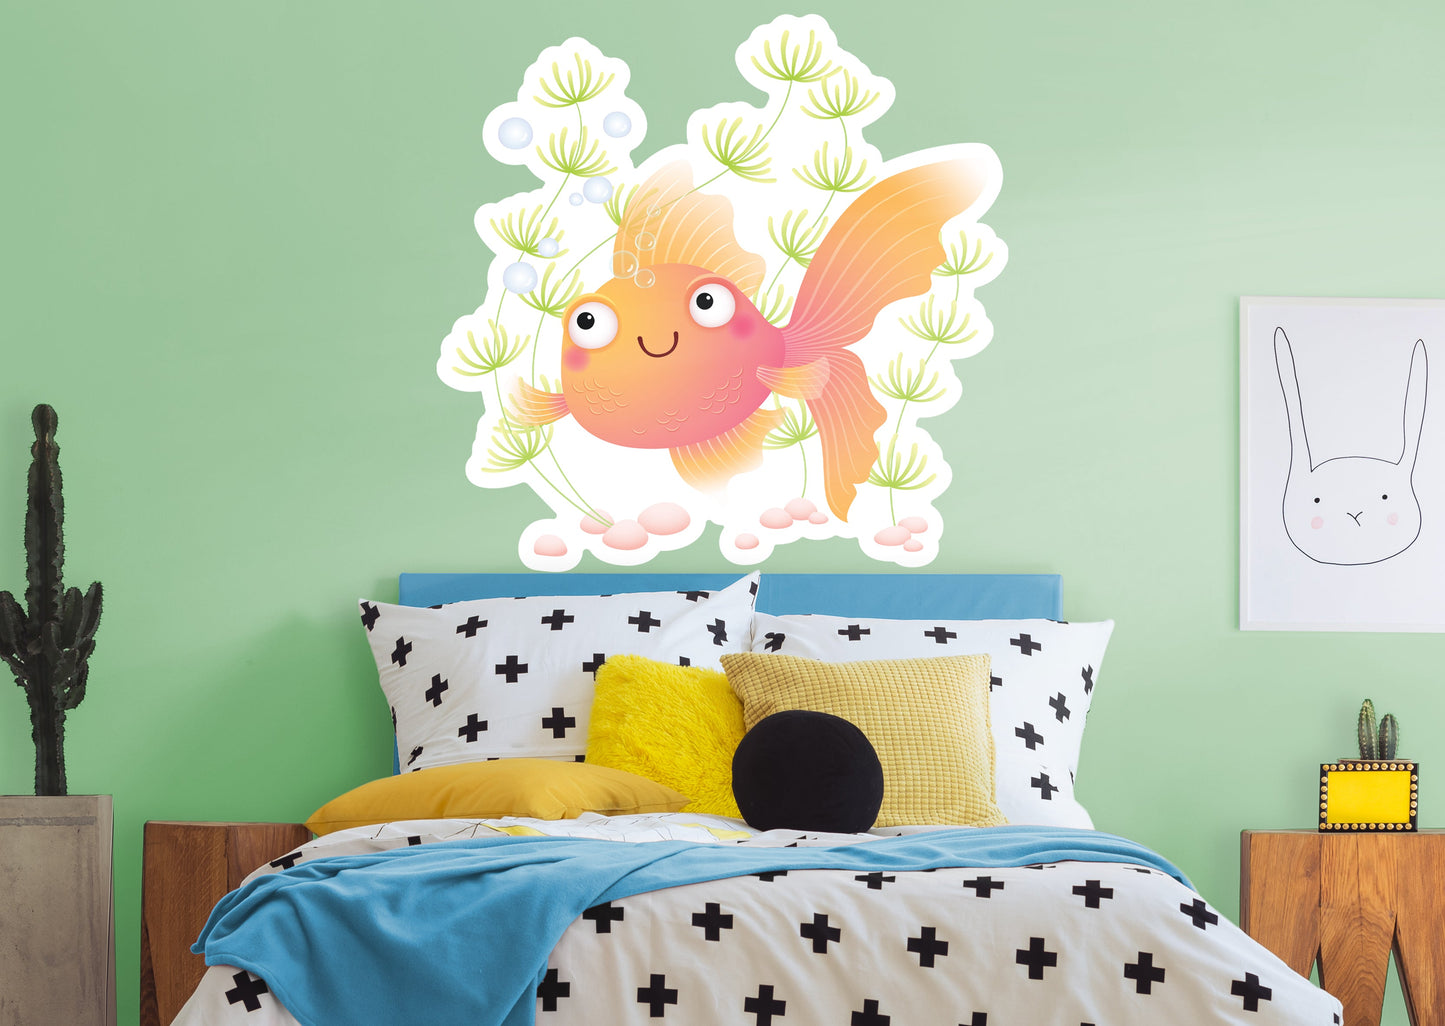 Nursery:  Fish Dreaming Icon        -   Removable Wall   Adhesive Decal